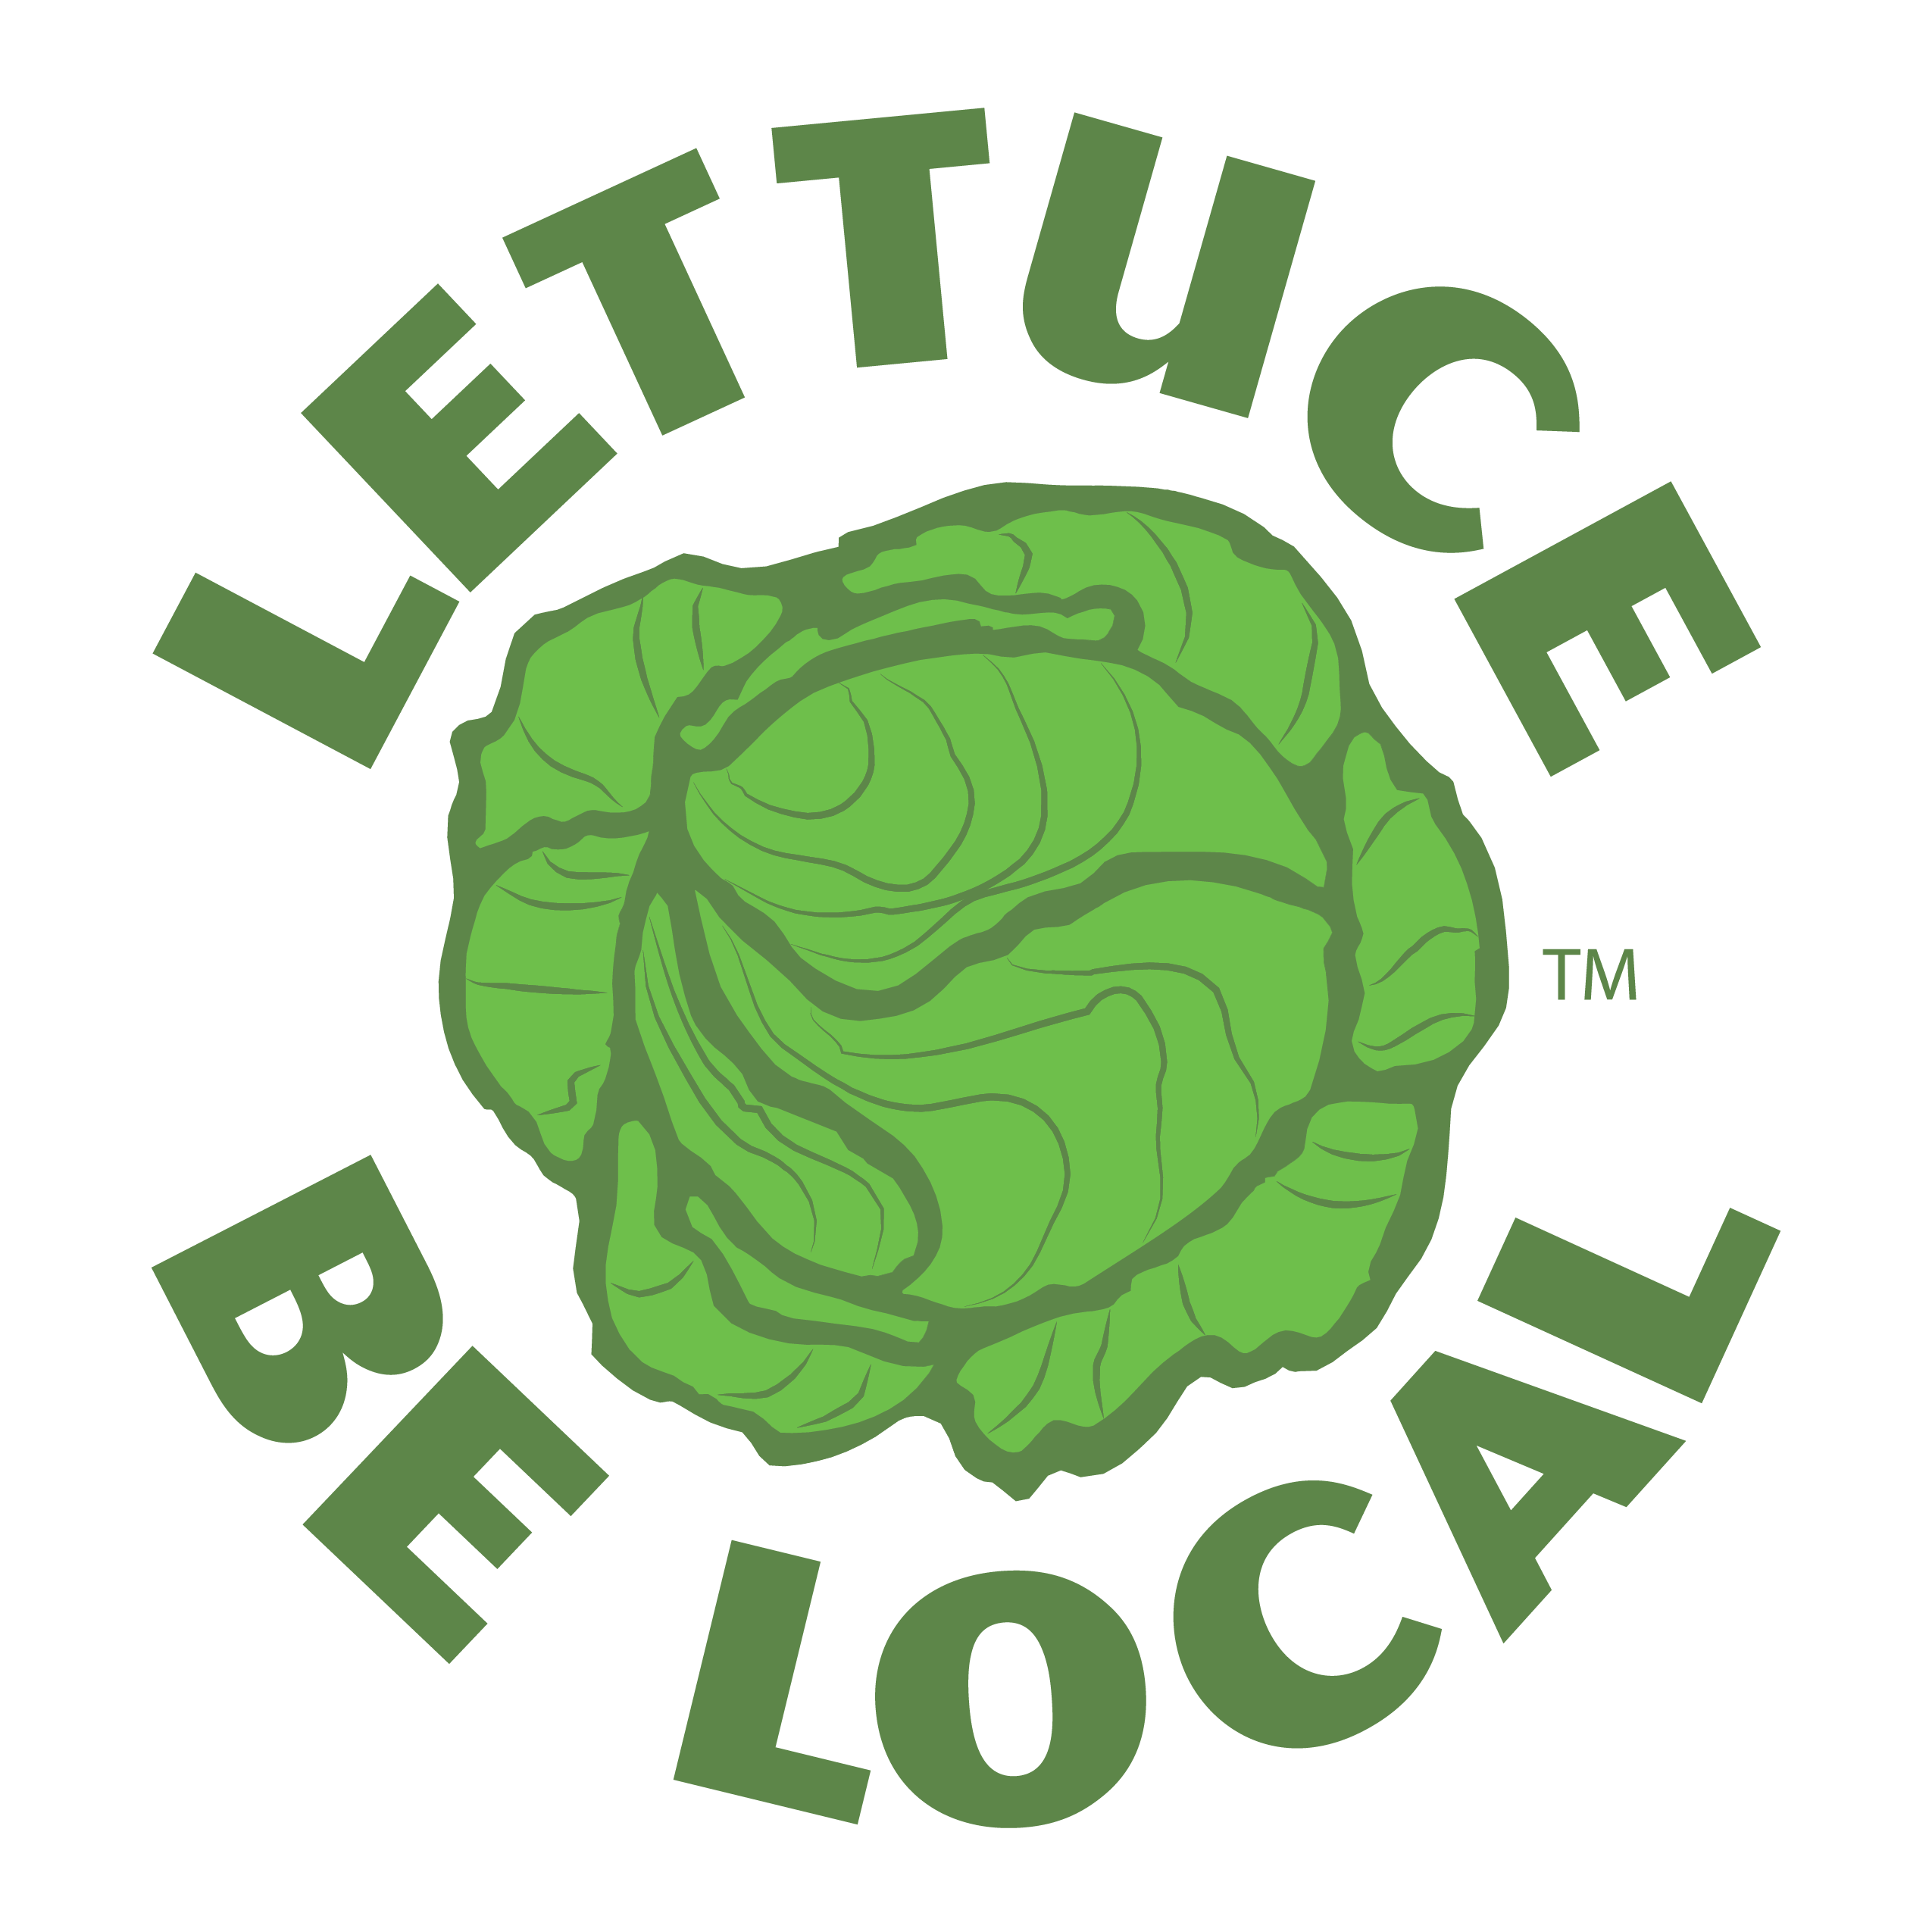 Lettuce Logo - Lettuce Be Local | Central Mass Regional Local Food Hub | Services